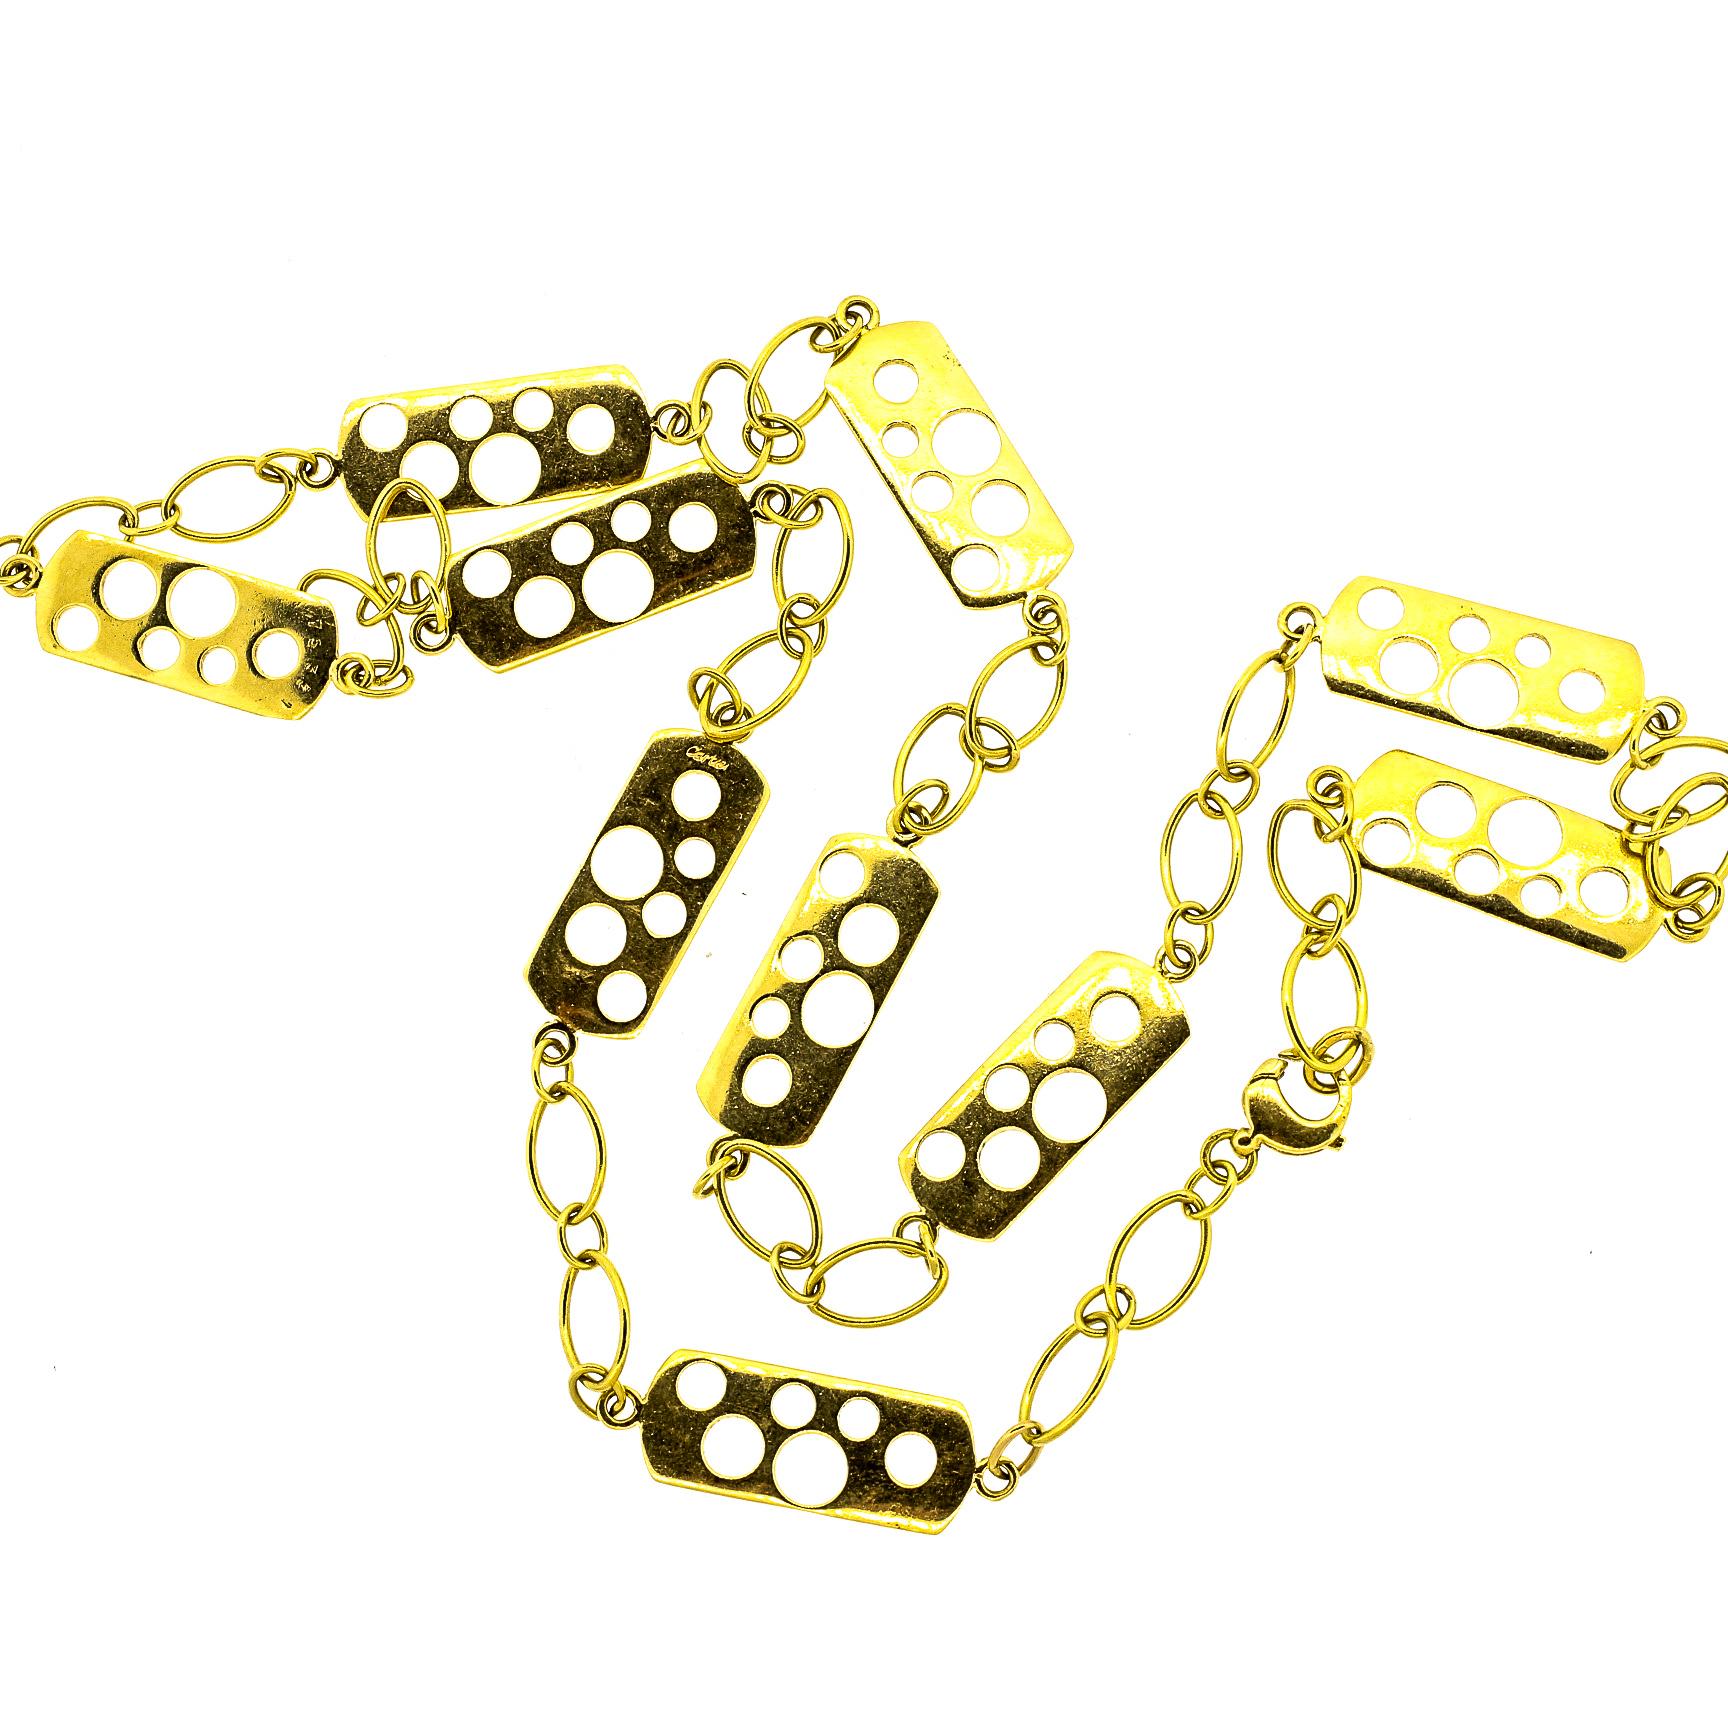 Unusual vintage Cartier 18k yellow gold fancy link necklace from the 1970s. This chain has panels of gold with cut out circles of different sizes and large loop links in between. The chain is light looking though it is hefty, and has nice dimension.